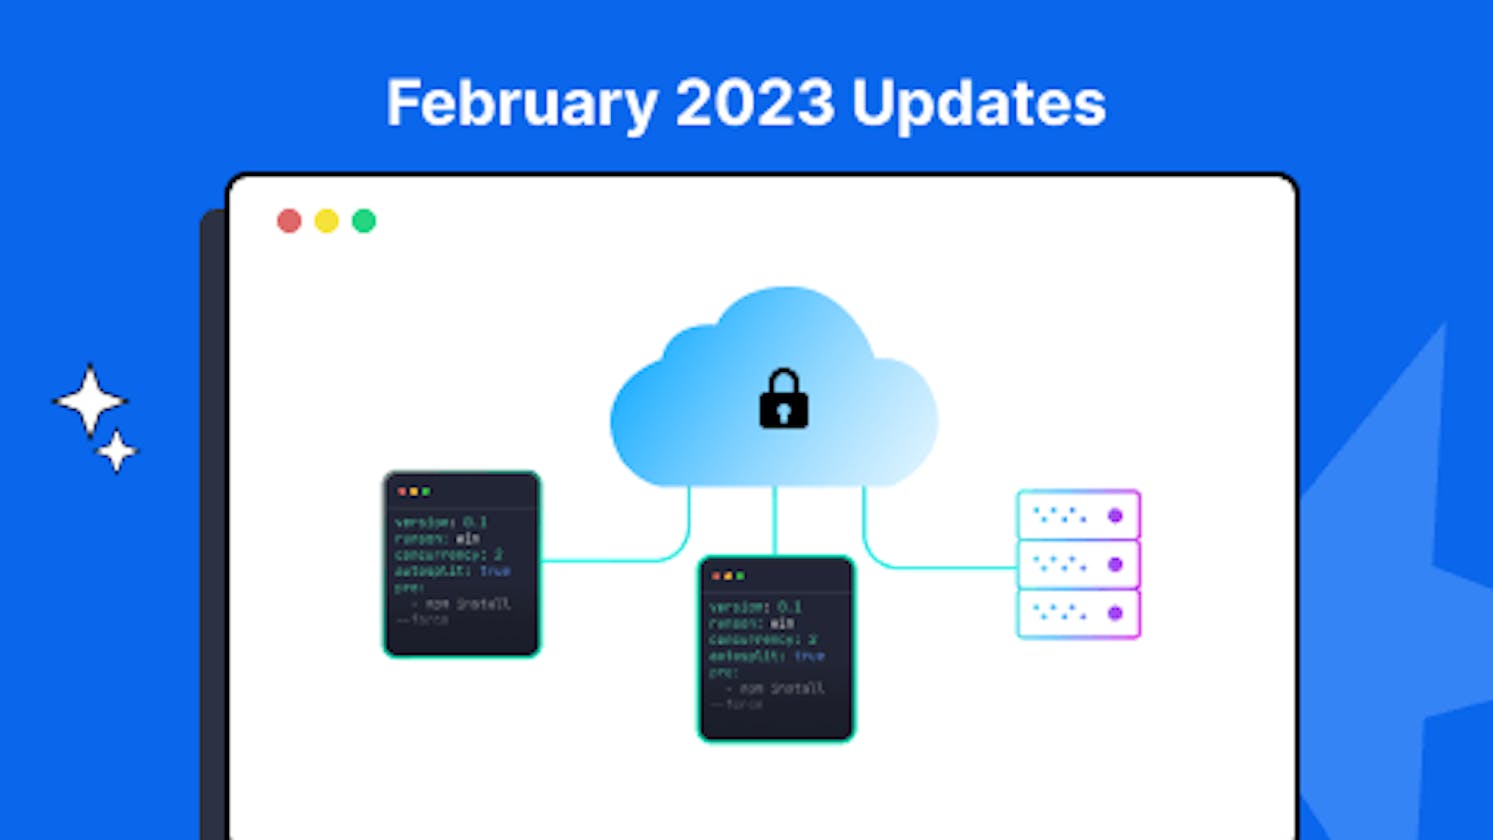 Feb’23 Updates: Live With HyperExecute Private Cloud, Cypress Testing On macOS Ventura, And More